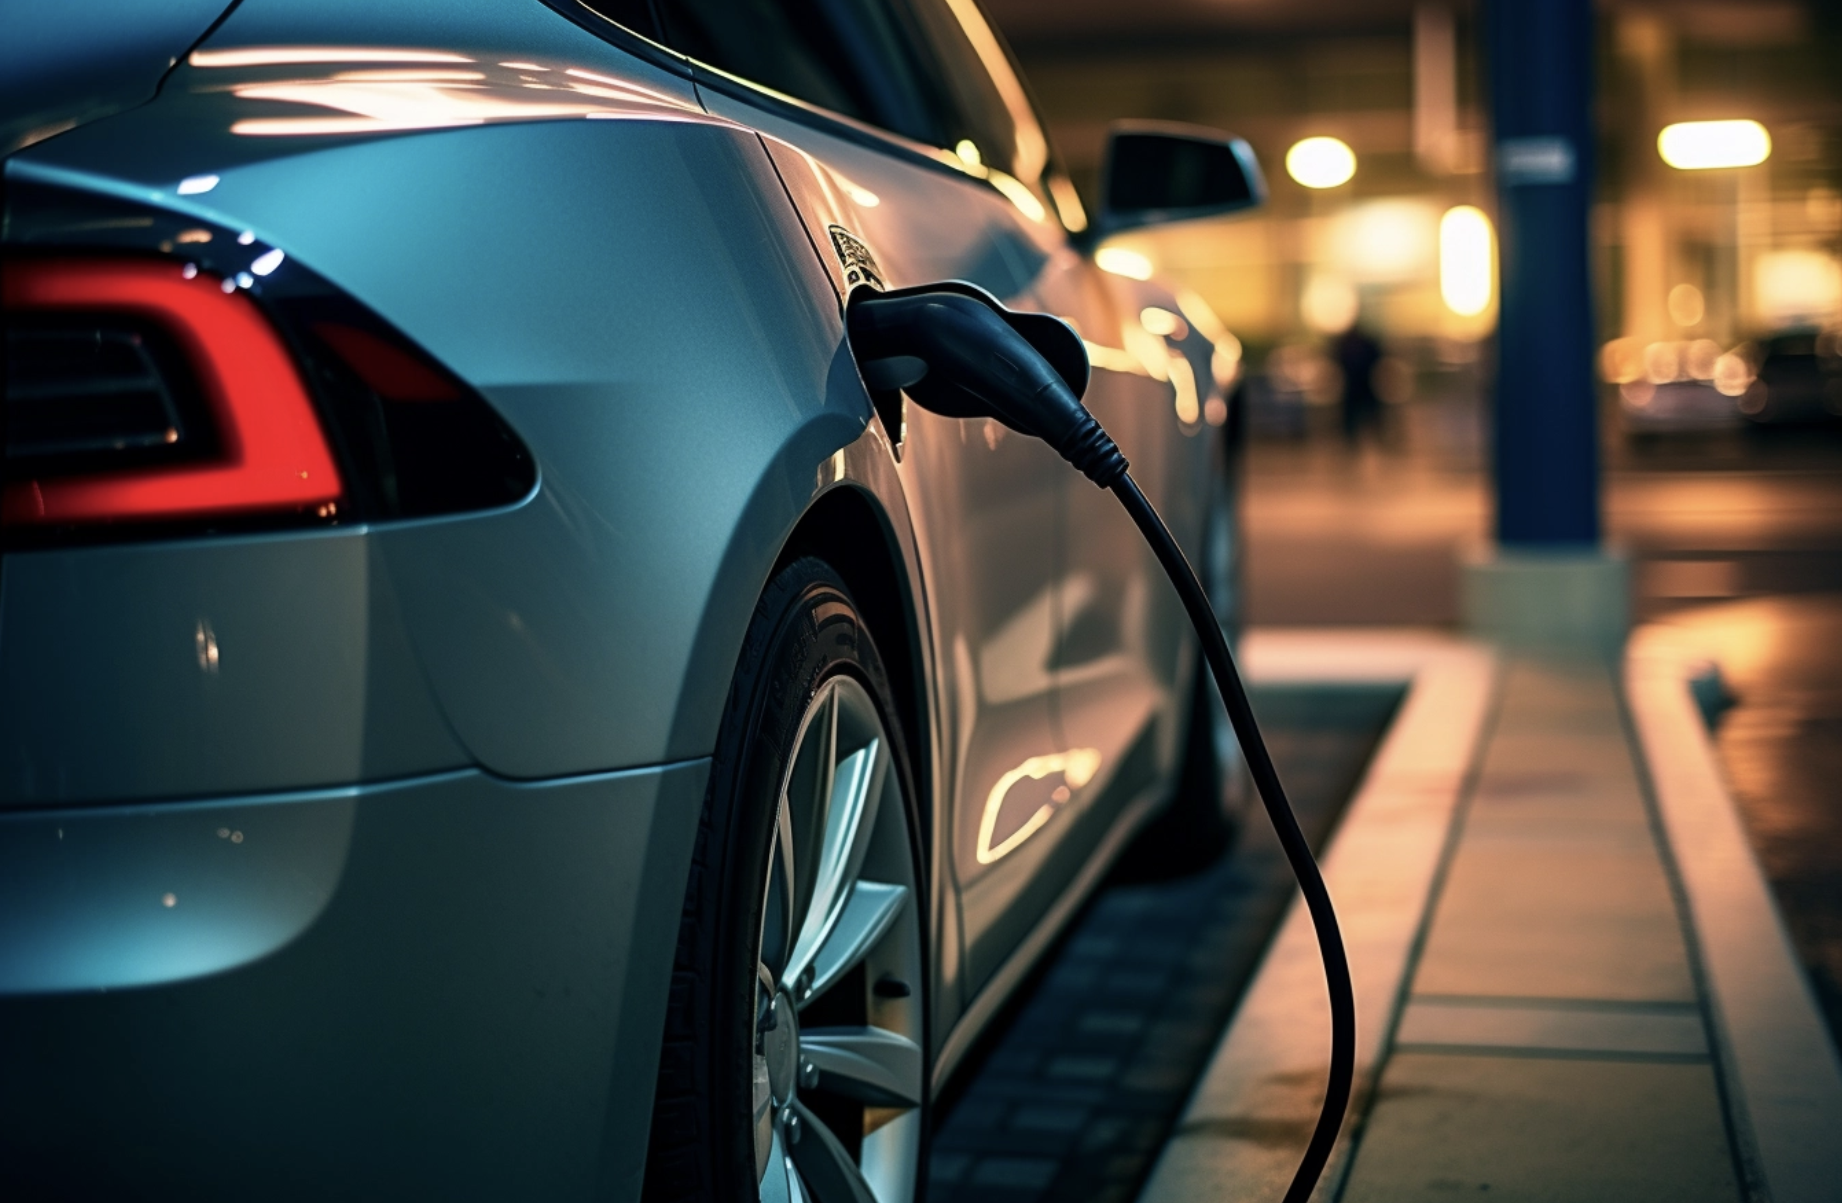 EXCLUSIVE-BP's EV charging arm cuts jobs, reduces global ambitions